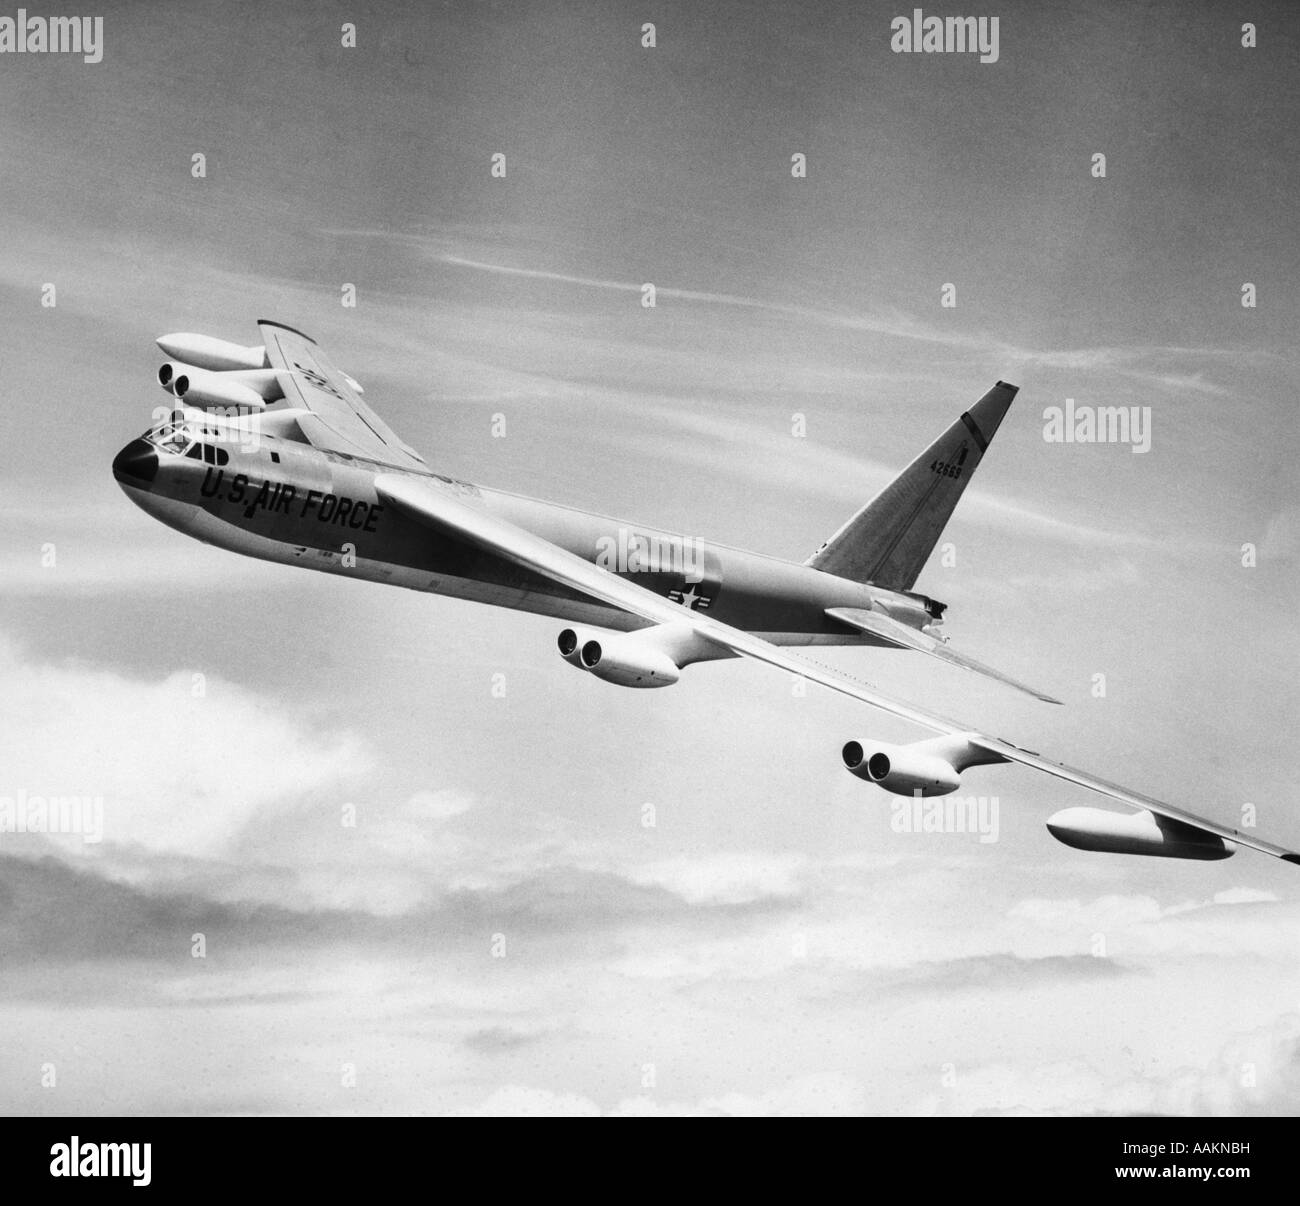 1950s 1955 B52E US AIR FORCE STRATO FORTRESS LONG RANGE STRATEGIC BOMBER AIRPLANE IN FLIGHT Stock Photo